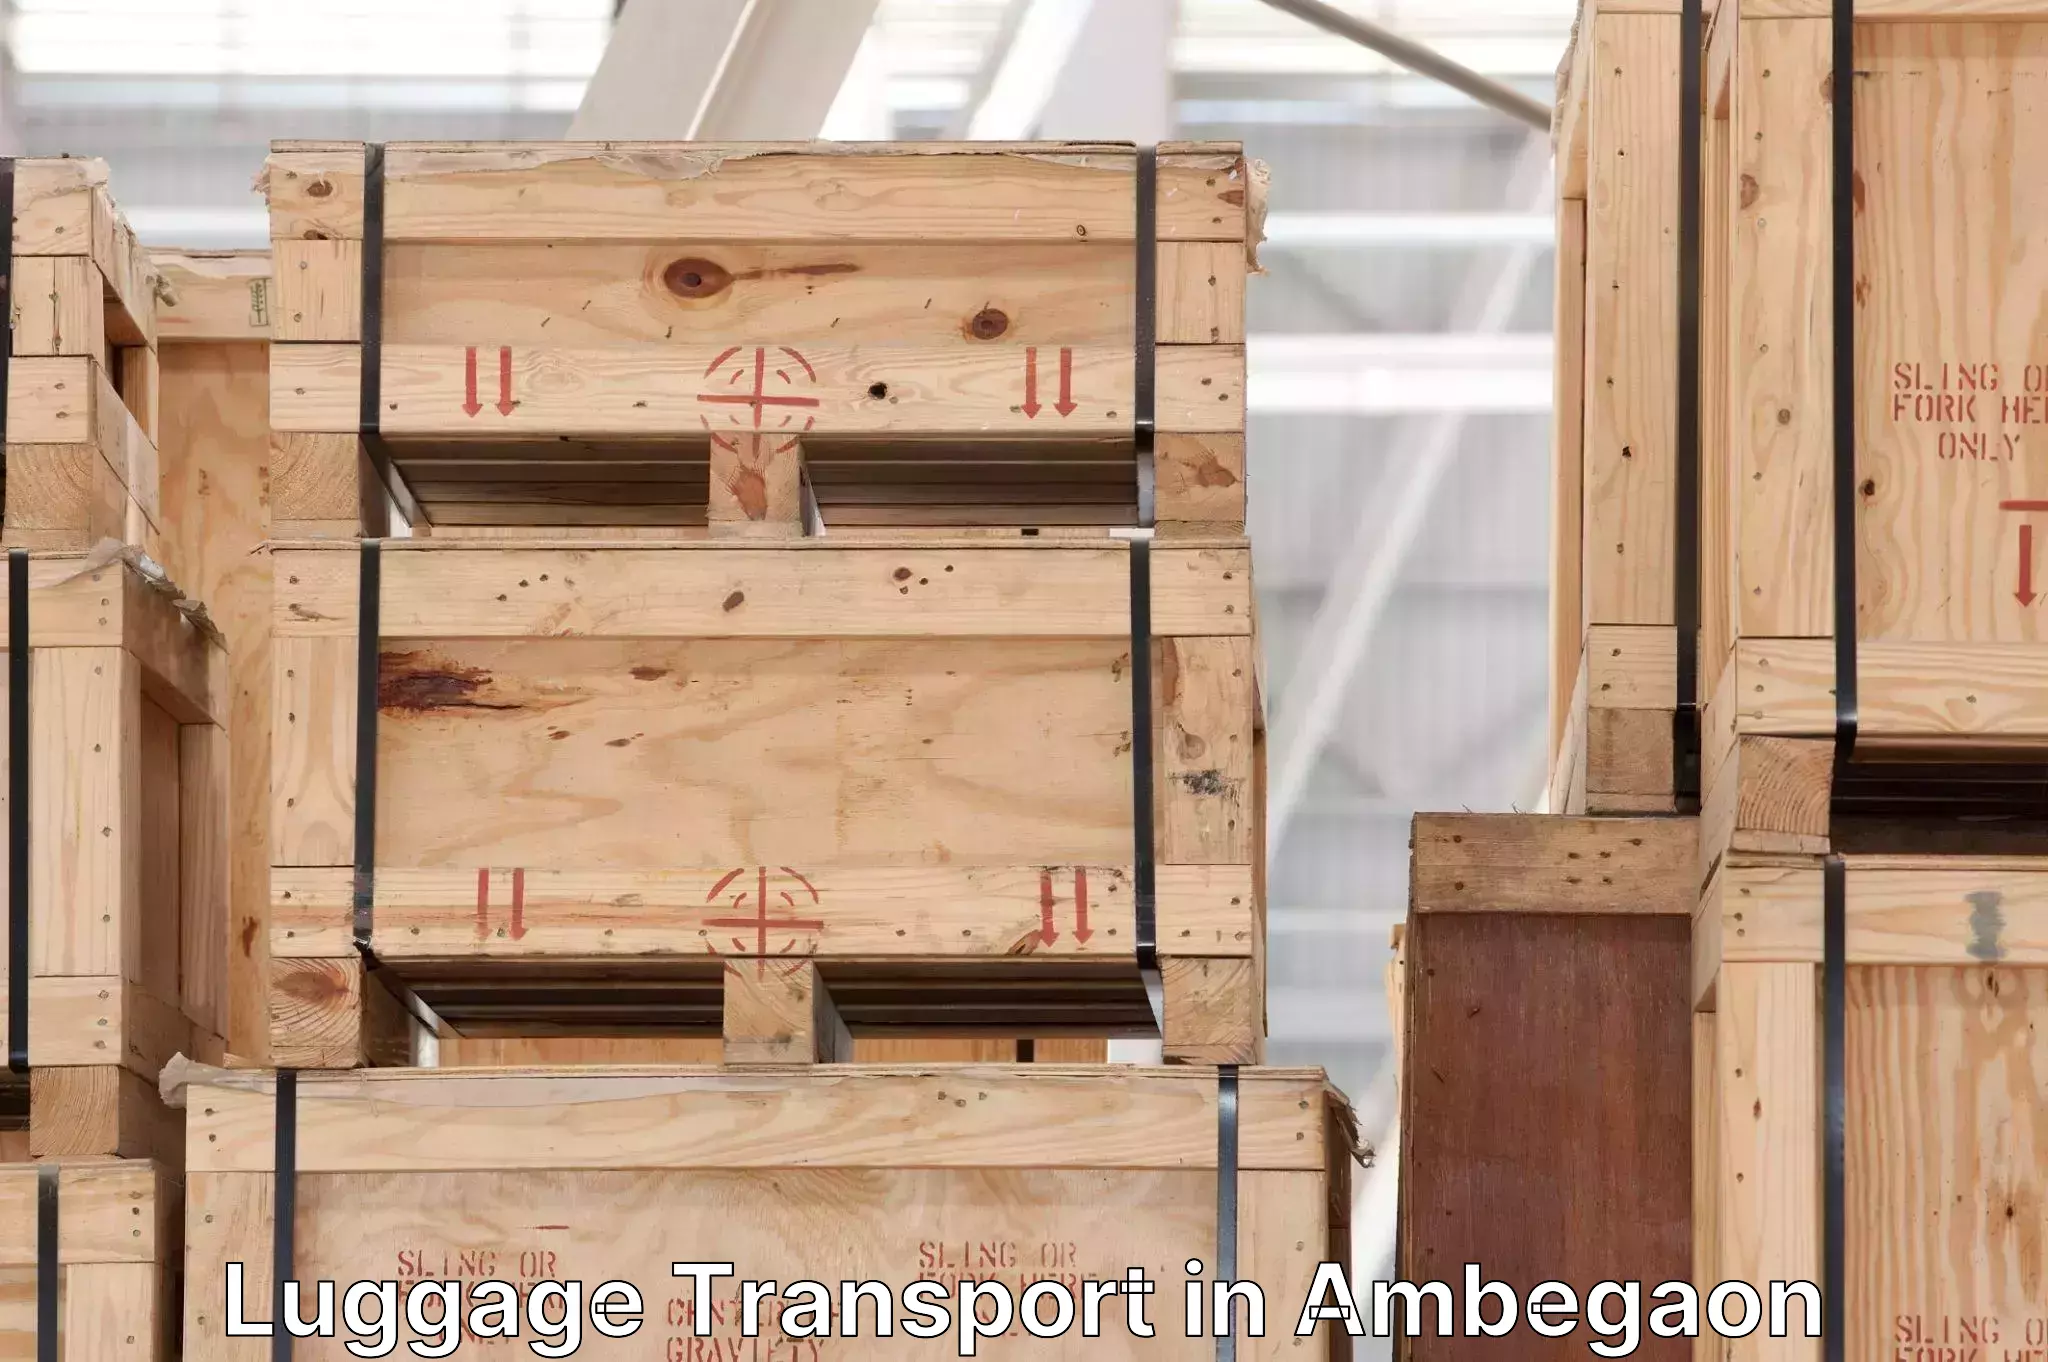 Luggage delivery estimate in Ambegaon